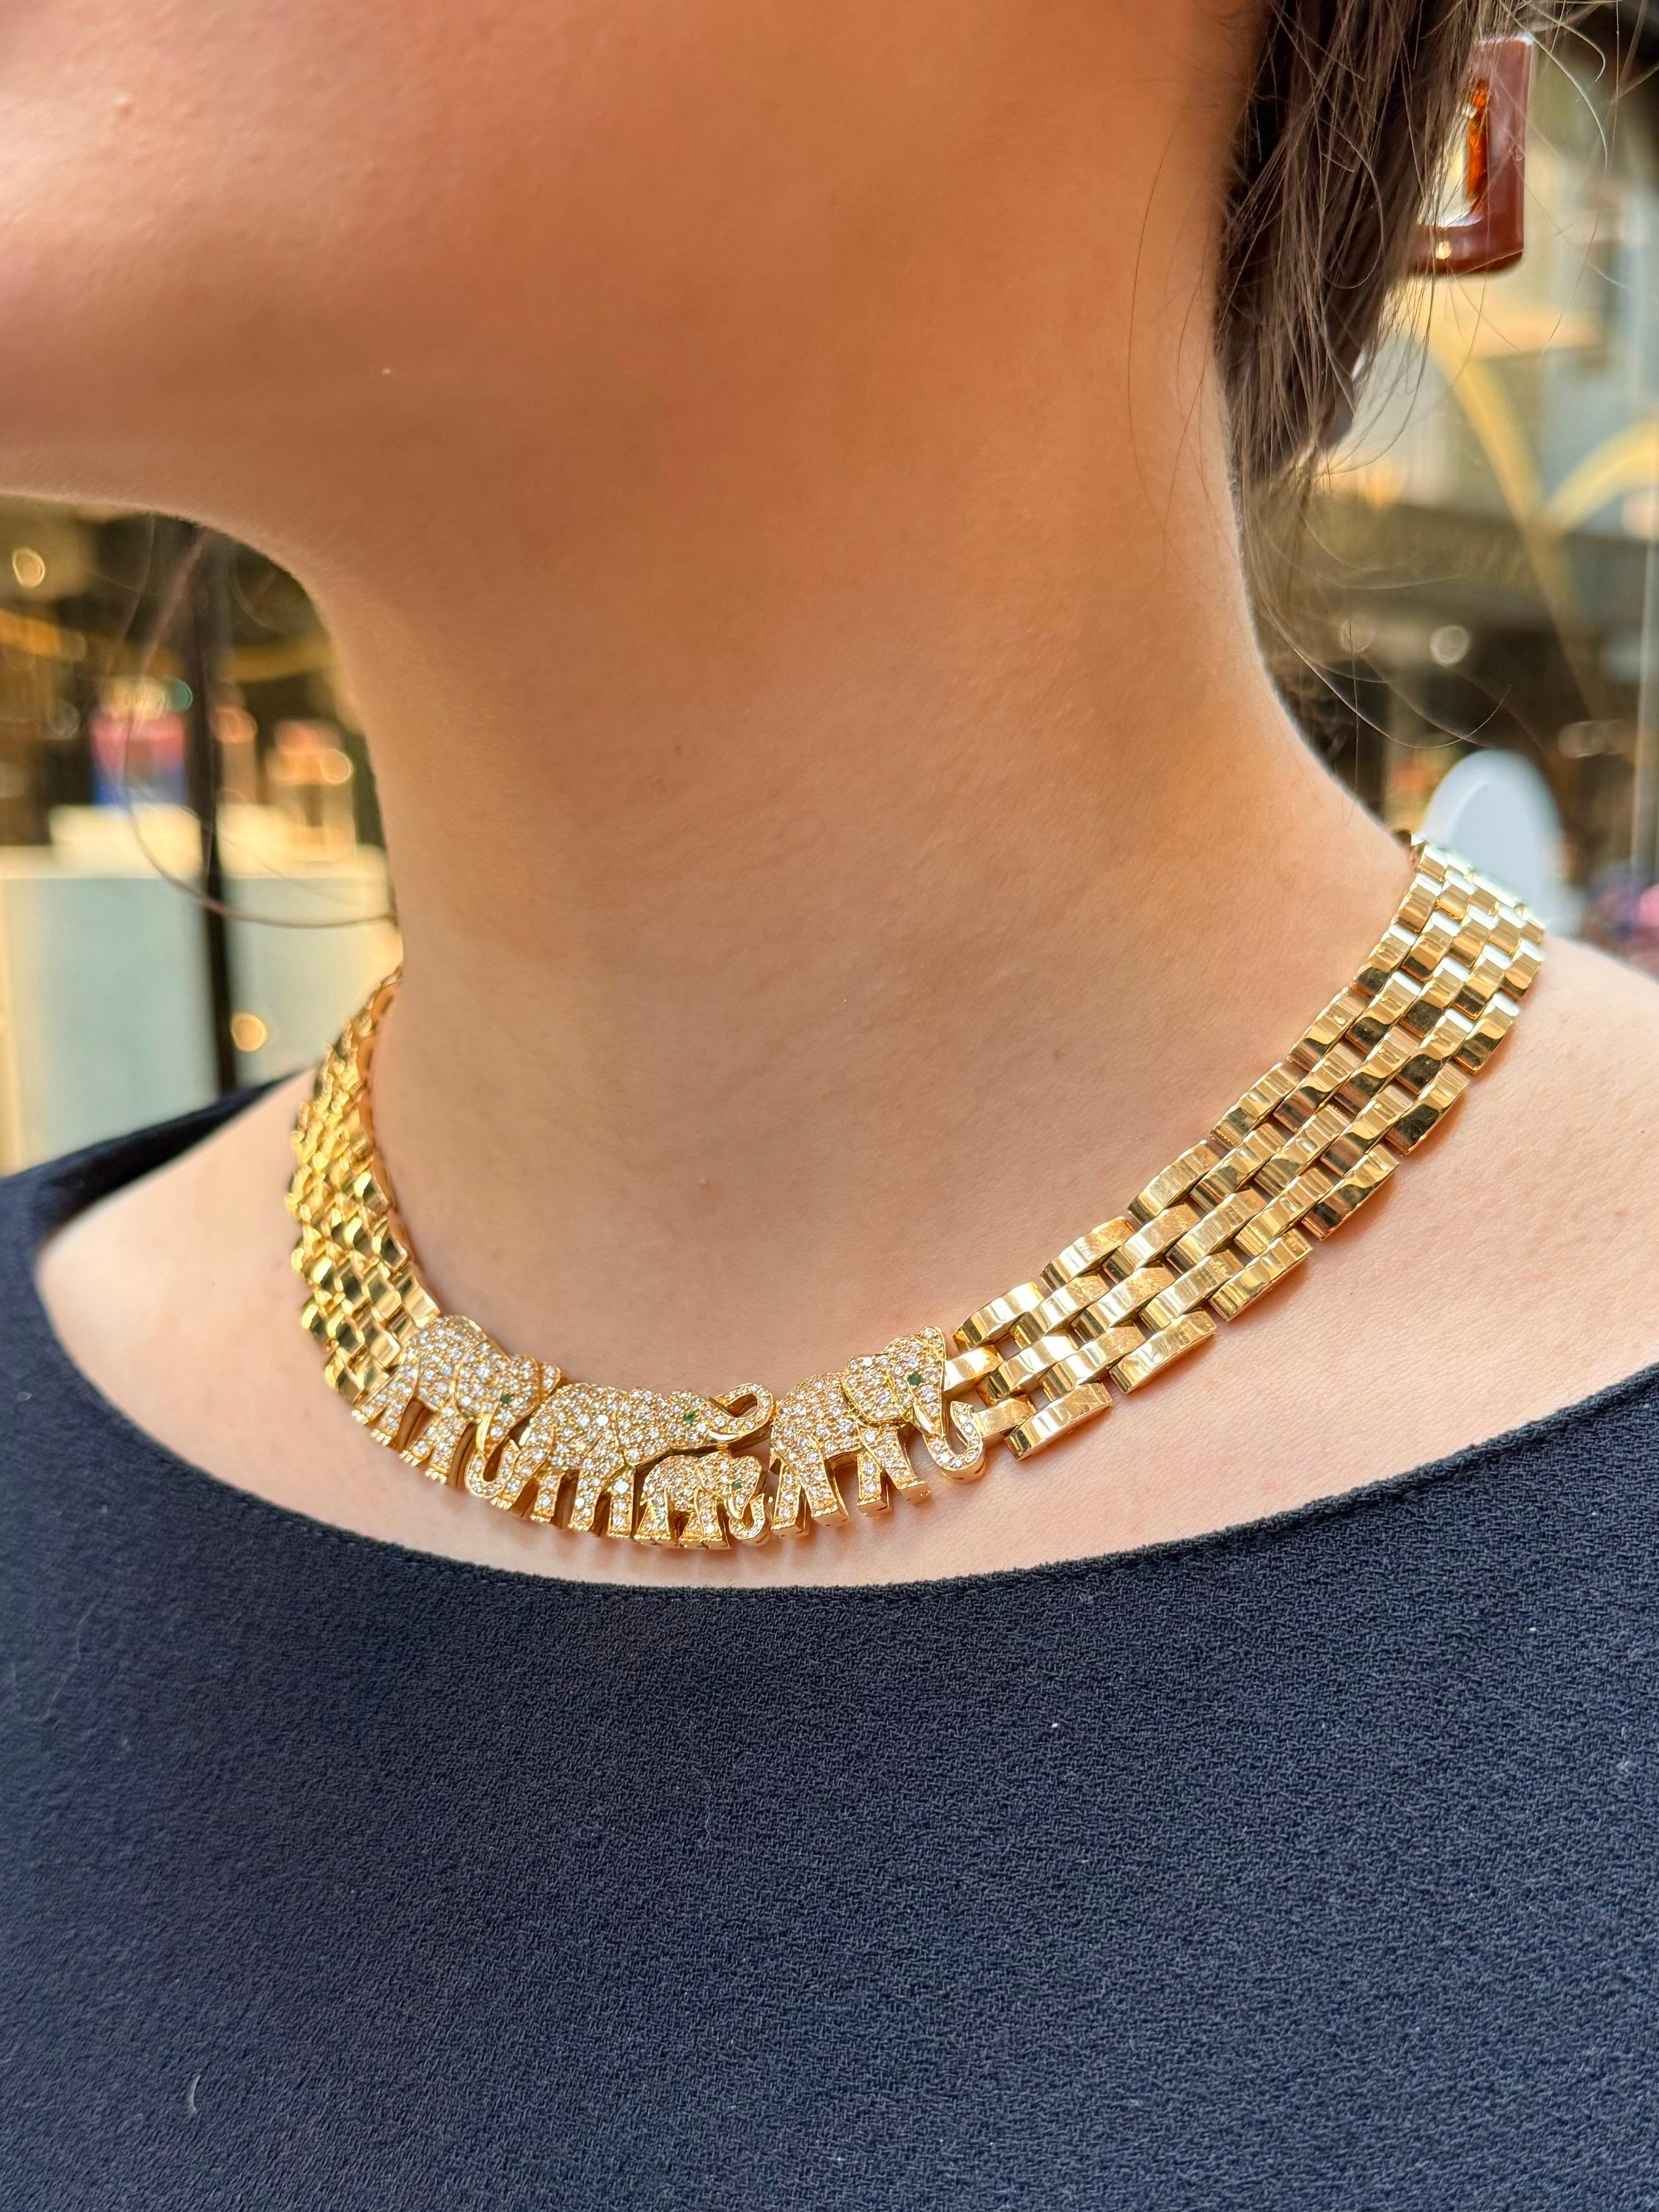 A simply stunning vintage Cartier Paris diamond Elephant Maillon necklace set in solid 18k yellow gold; circa early 1998.

The necklace is composed of a central panel which depicts a family of four walking elephants. The elephants are pave set with